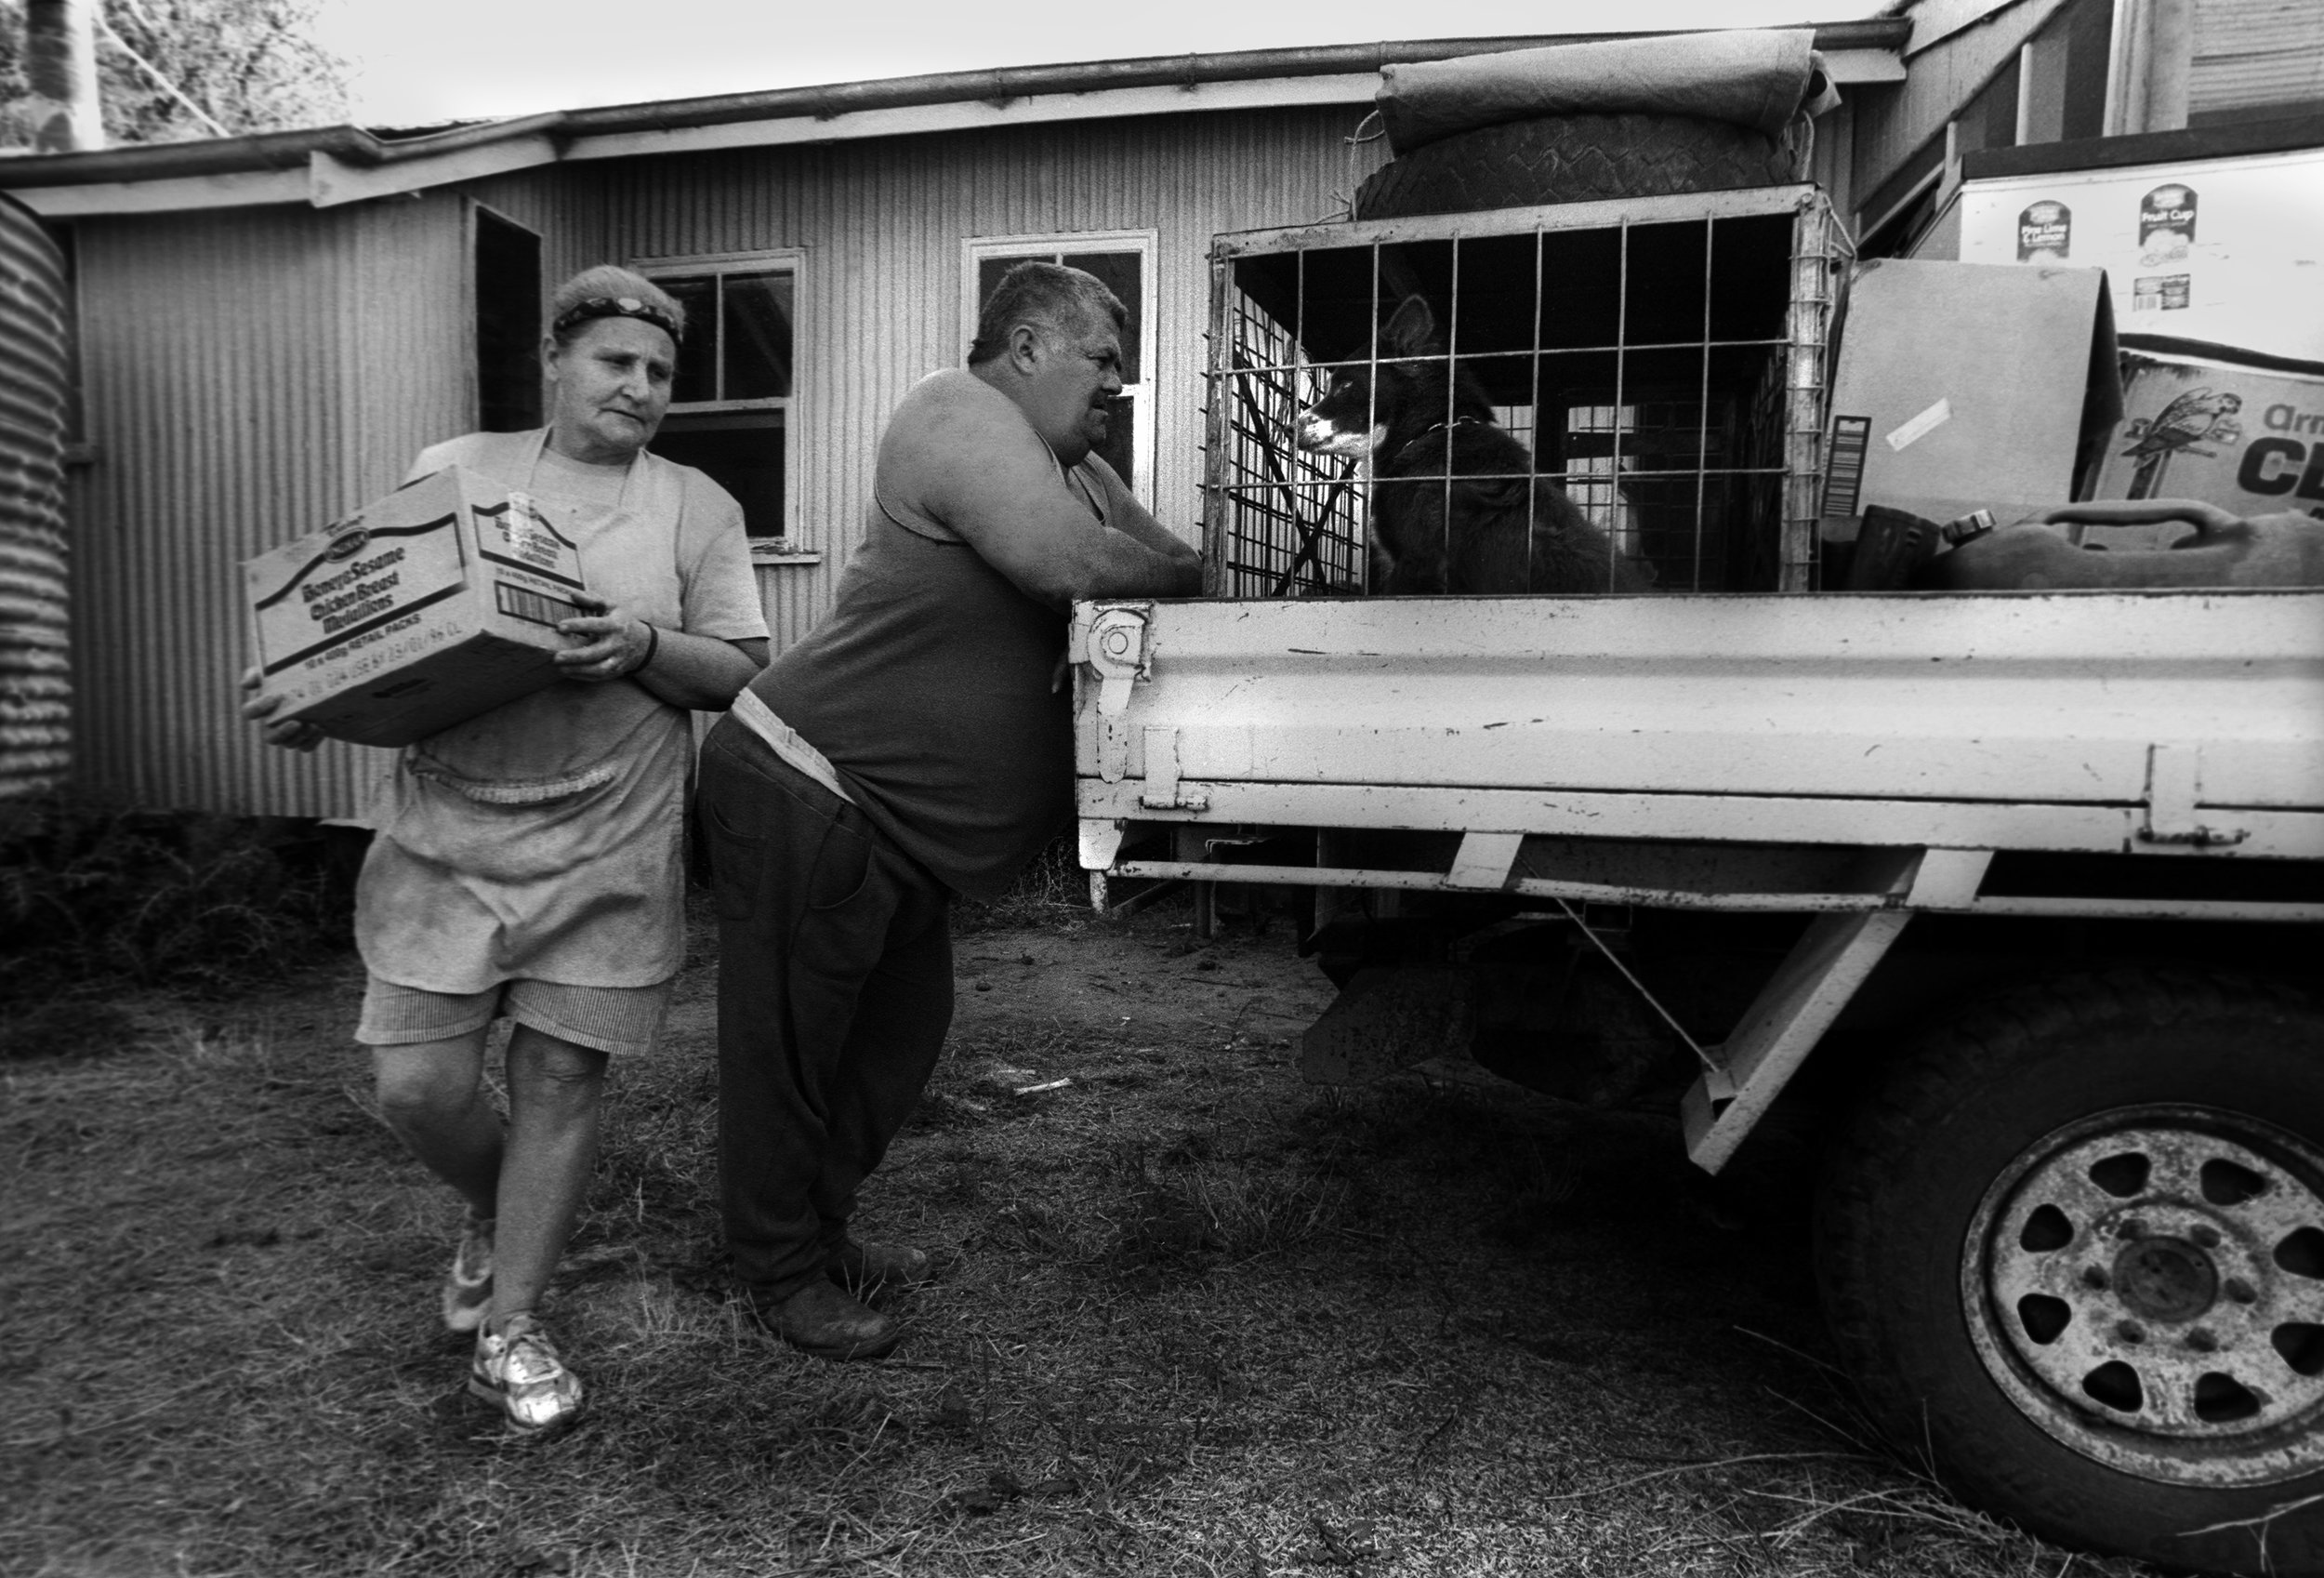  The shearer’s cook and her husband pack the ‘ute’ (utility truck) before travelling to the next sheep station. Outback QLD, Australia. 1997 